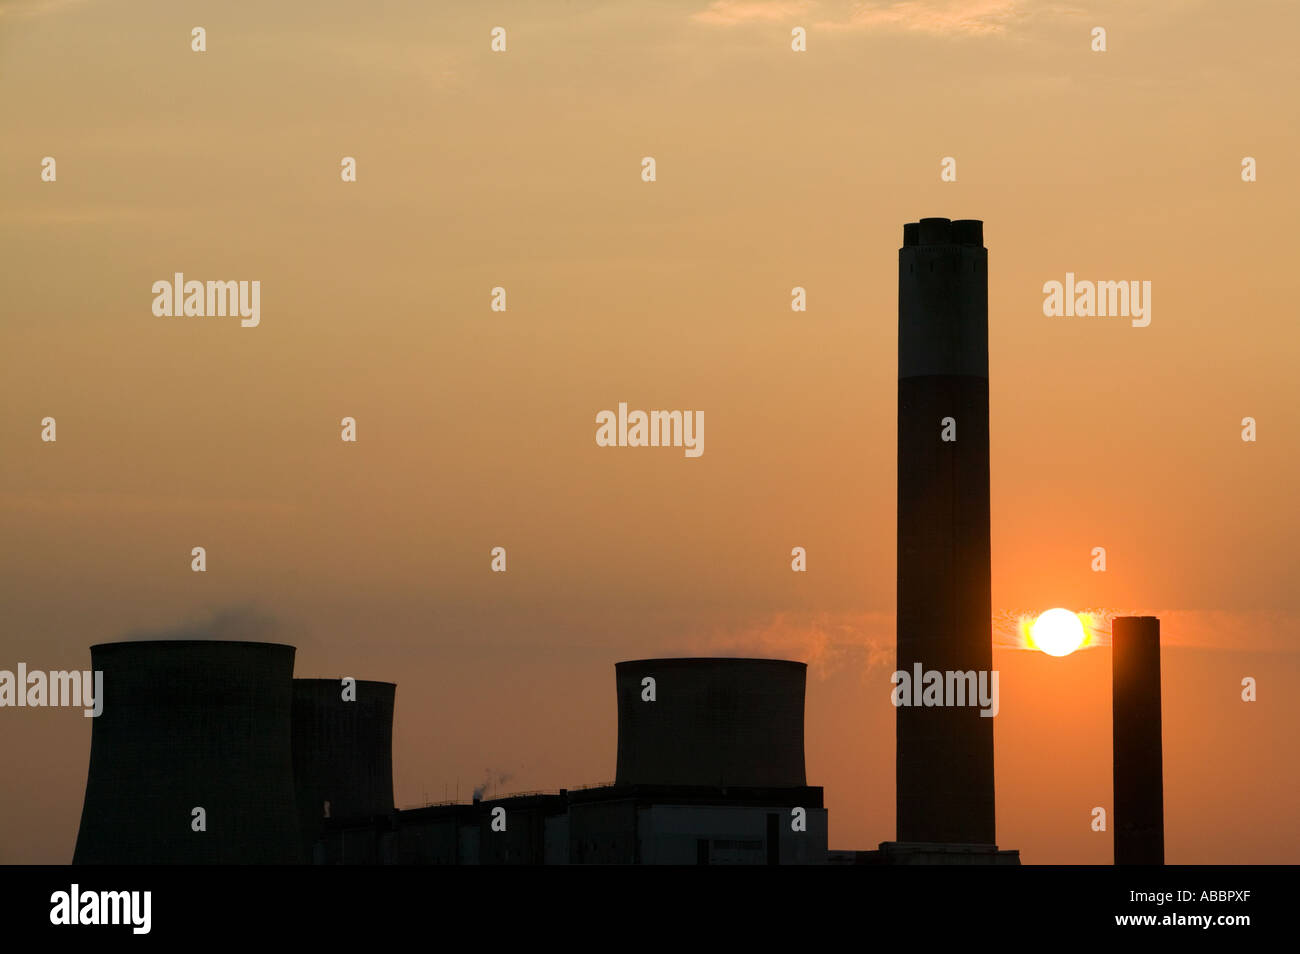 Ratcliffe on soar power station, a Coal fired power plant in nottinghamshire, UK Stock Photo